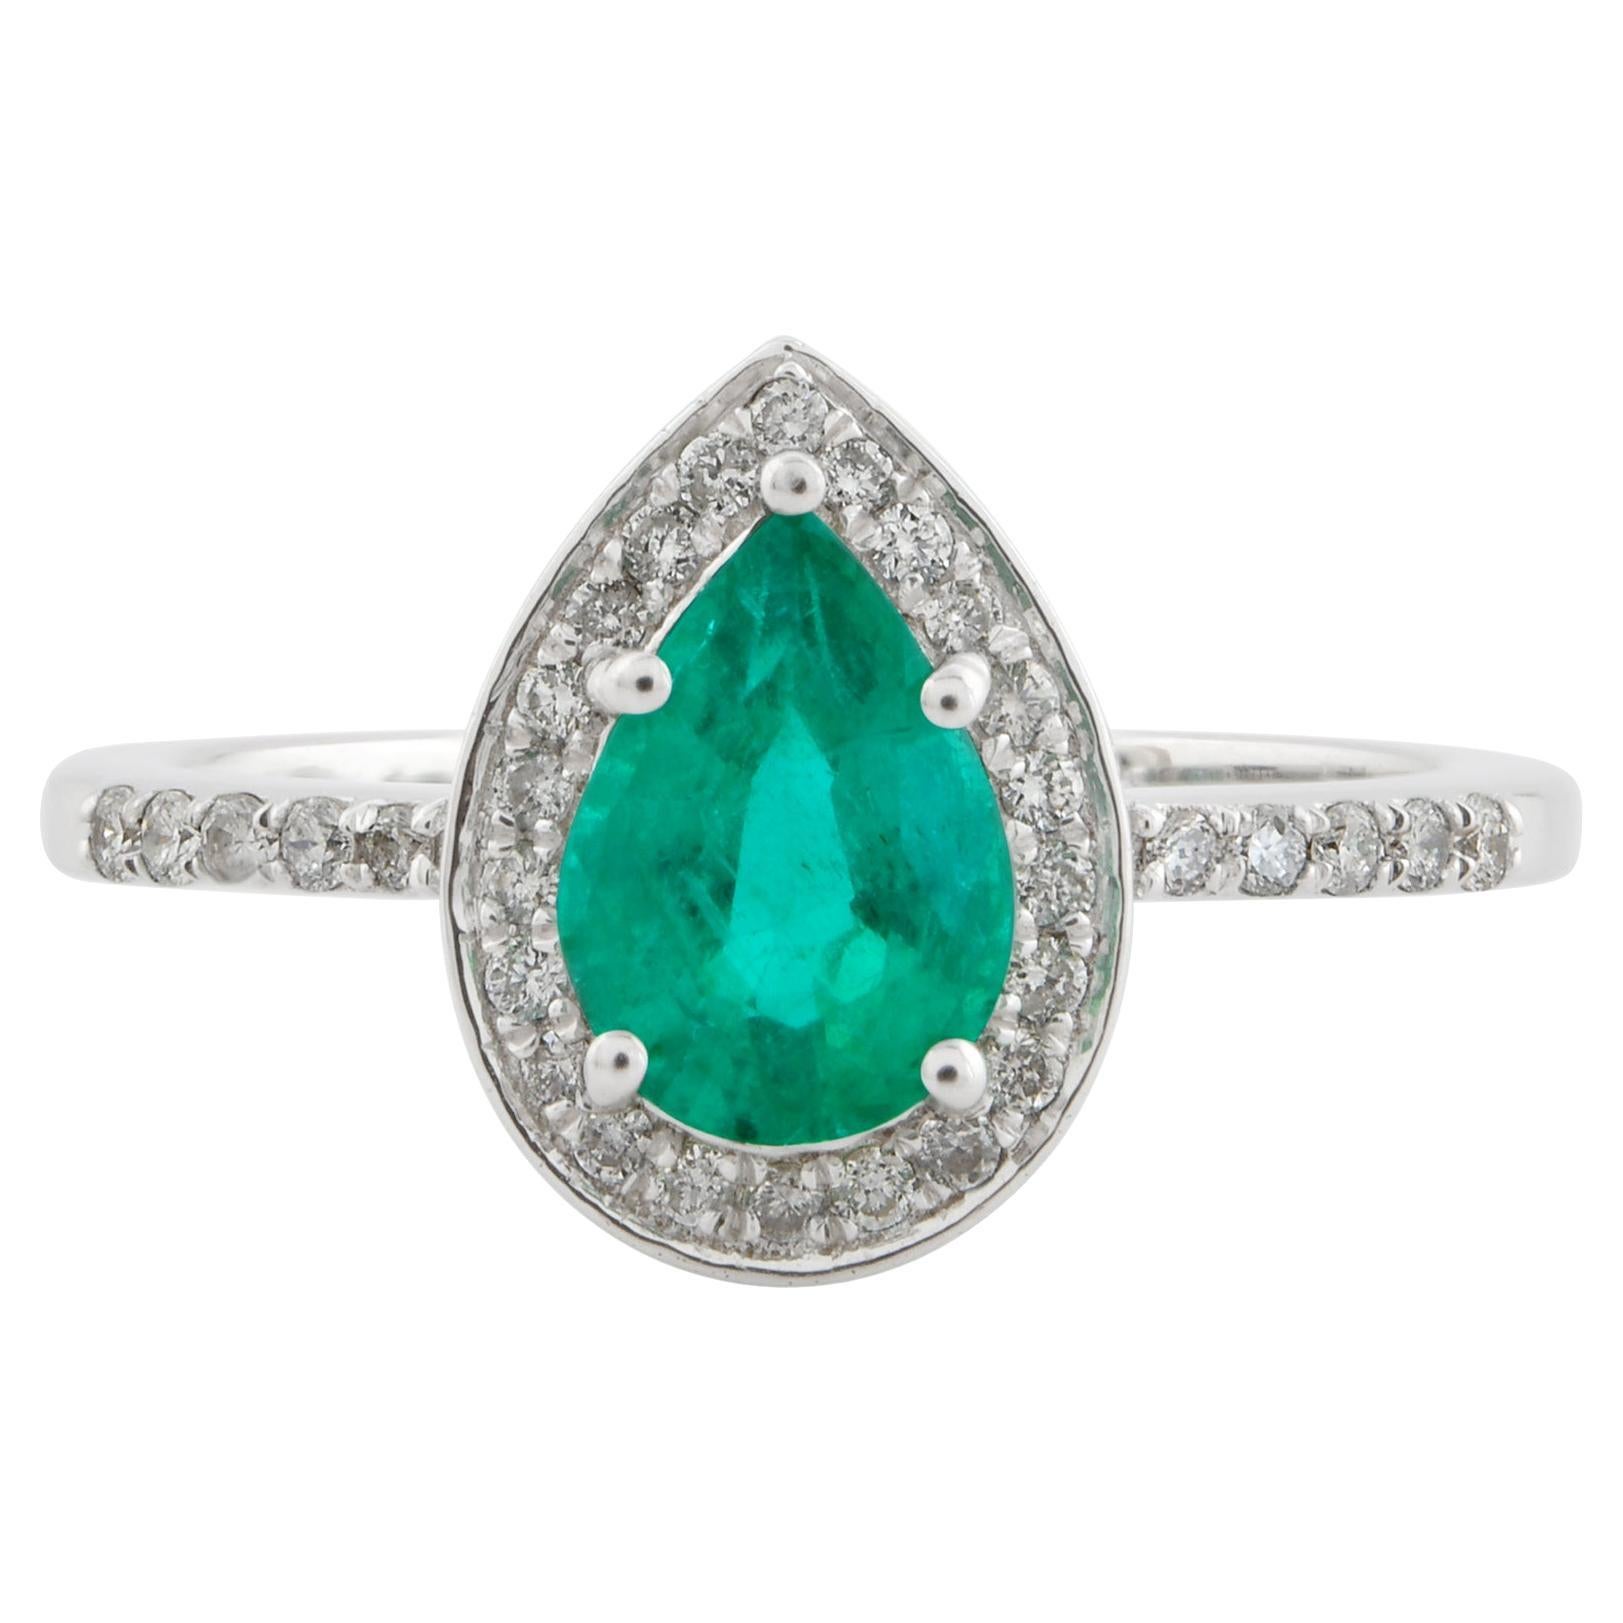 1.40 Tcw Pear Natural Emerald Gemstone Halo Ring Diamond 14k White Gold Jewelry For Sale